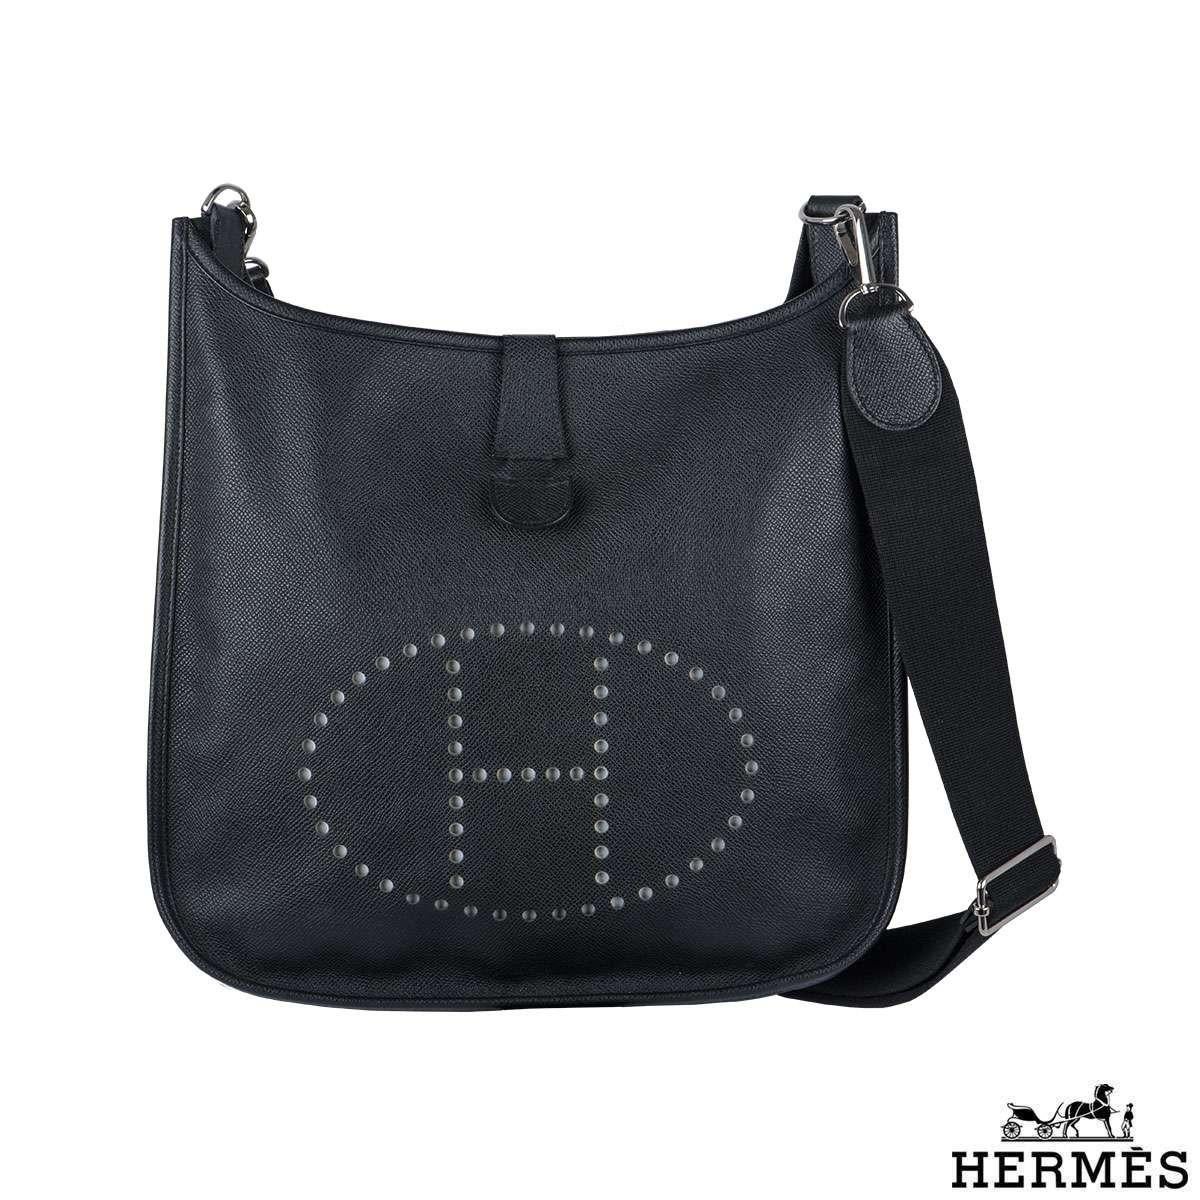 This Hermes Evelyne III 33 cm bag is crafted from black Epsom leather. It features a detachable shoulder strap and a back pocket making it an extremely functional bag. The bag is unworn in condition and comes along with its dustbag and box. 

Date